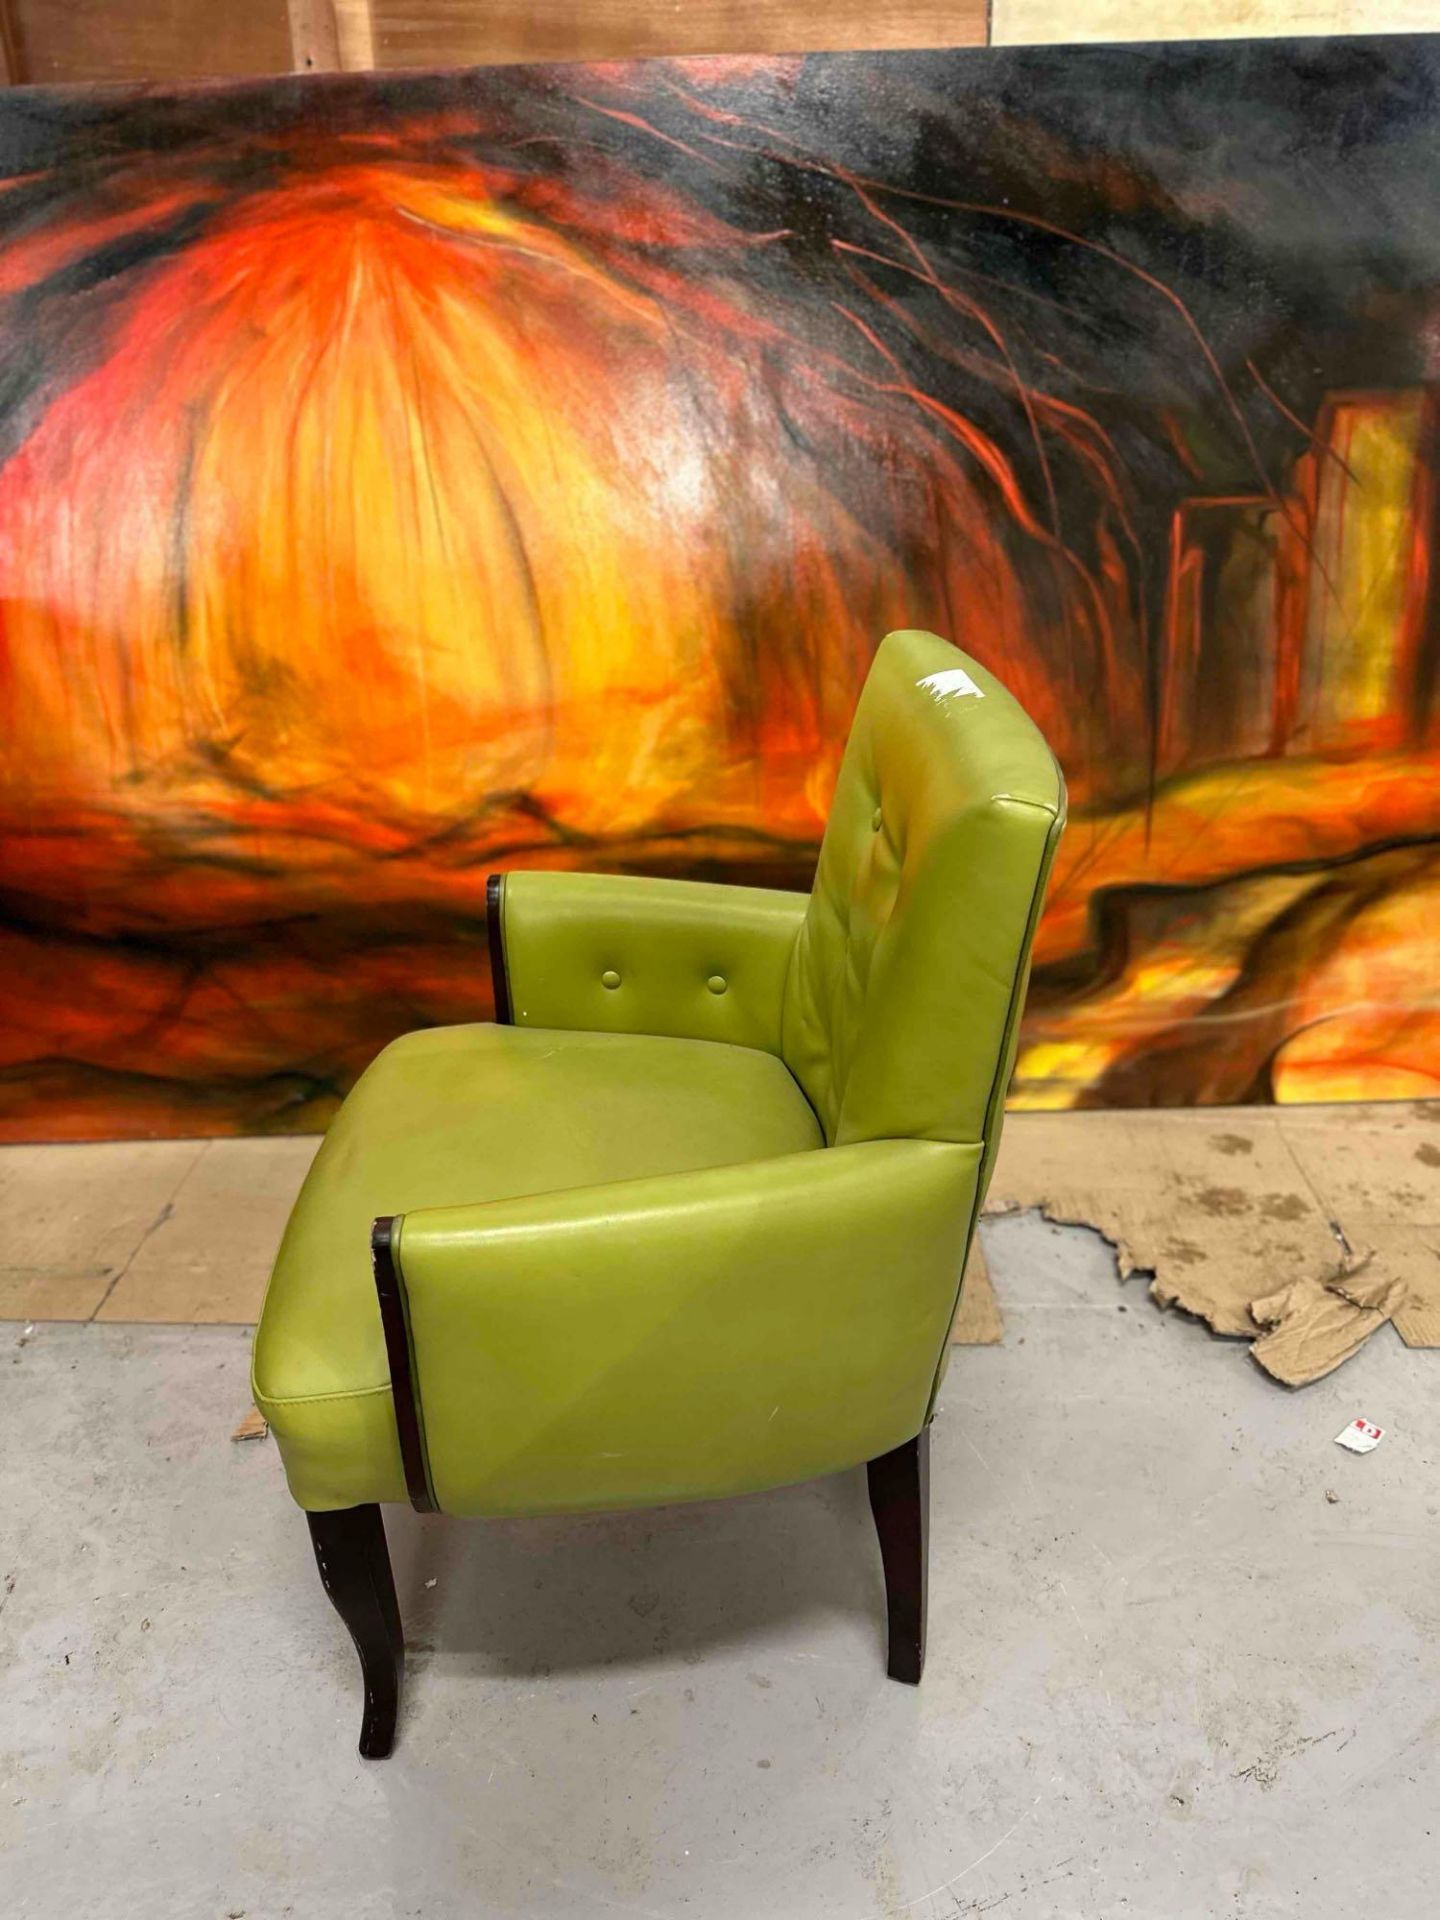 Colber International Lime Green Leather Armchair With Button Detail On Wooden Frame Enjoy - Image 3 of 5